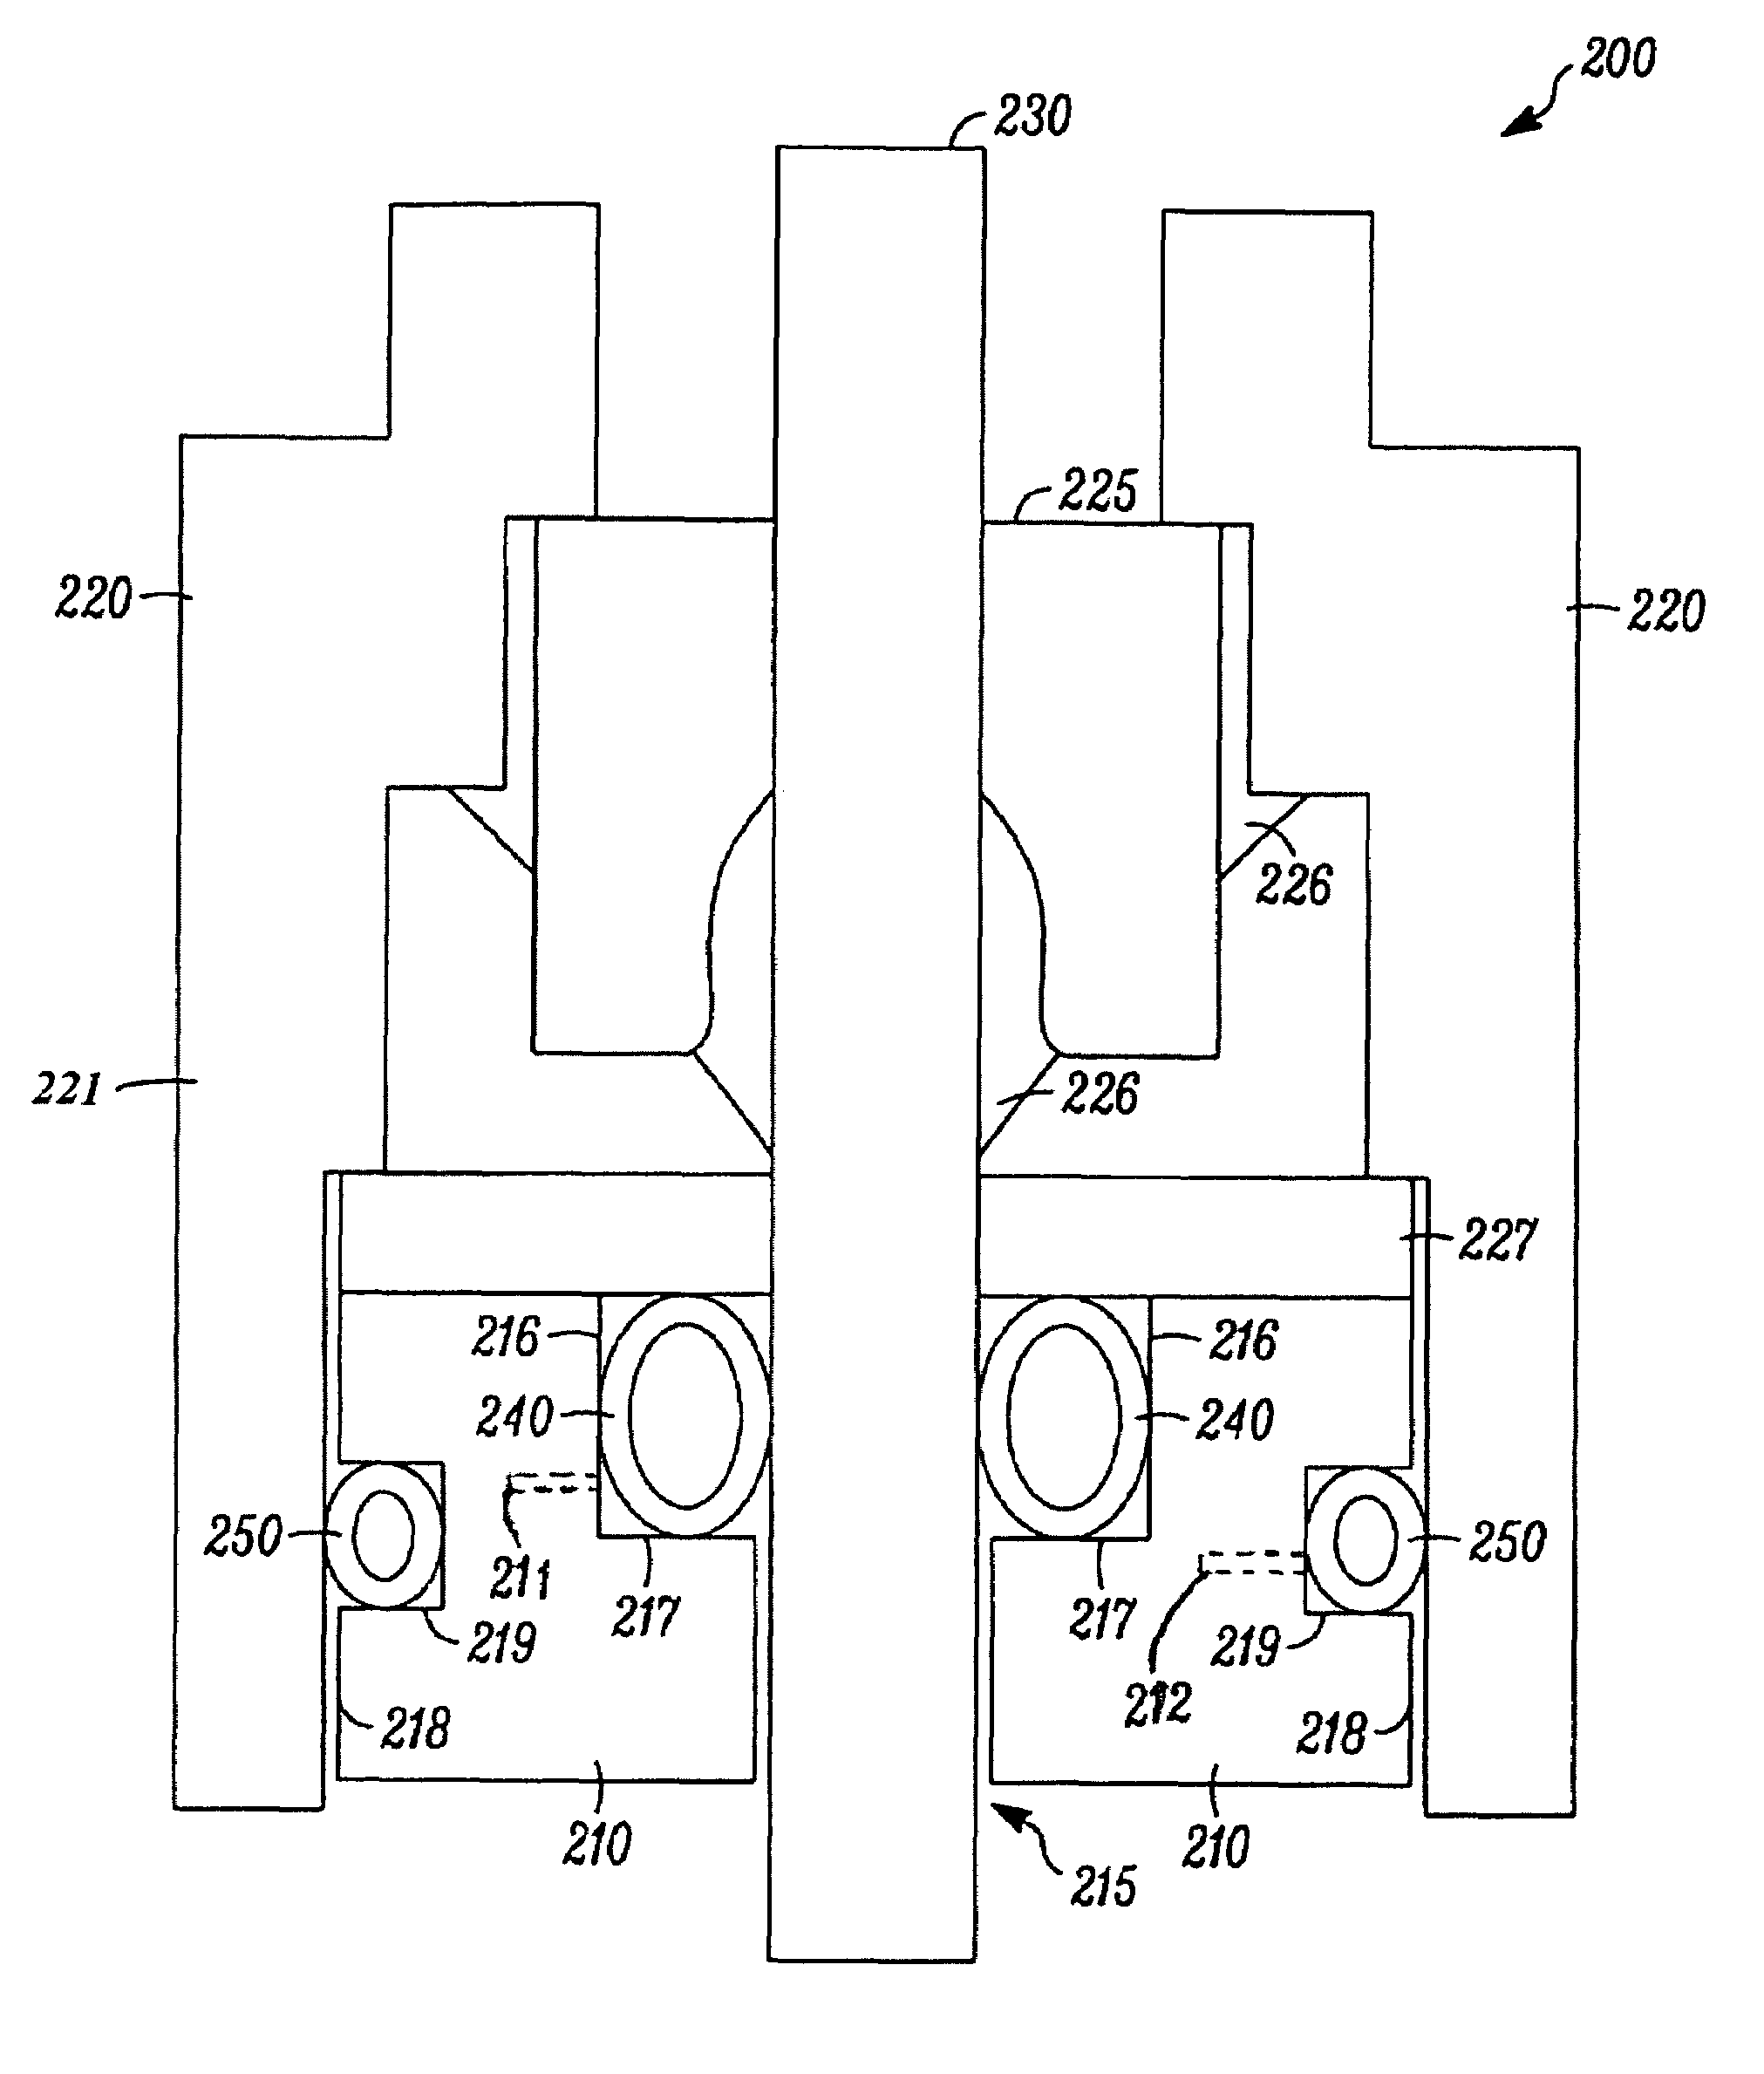 Filtering capacitor feedthrough assembly